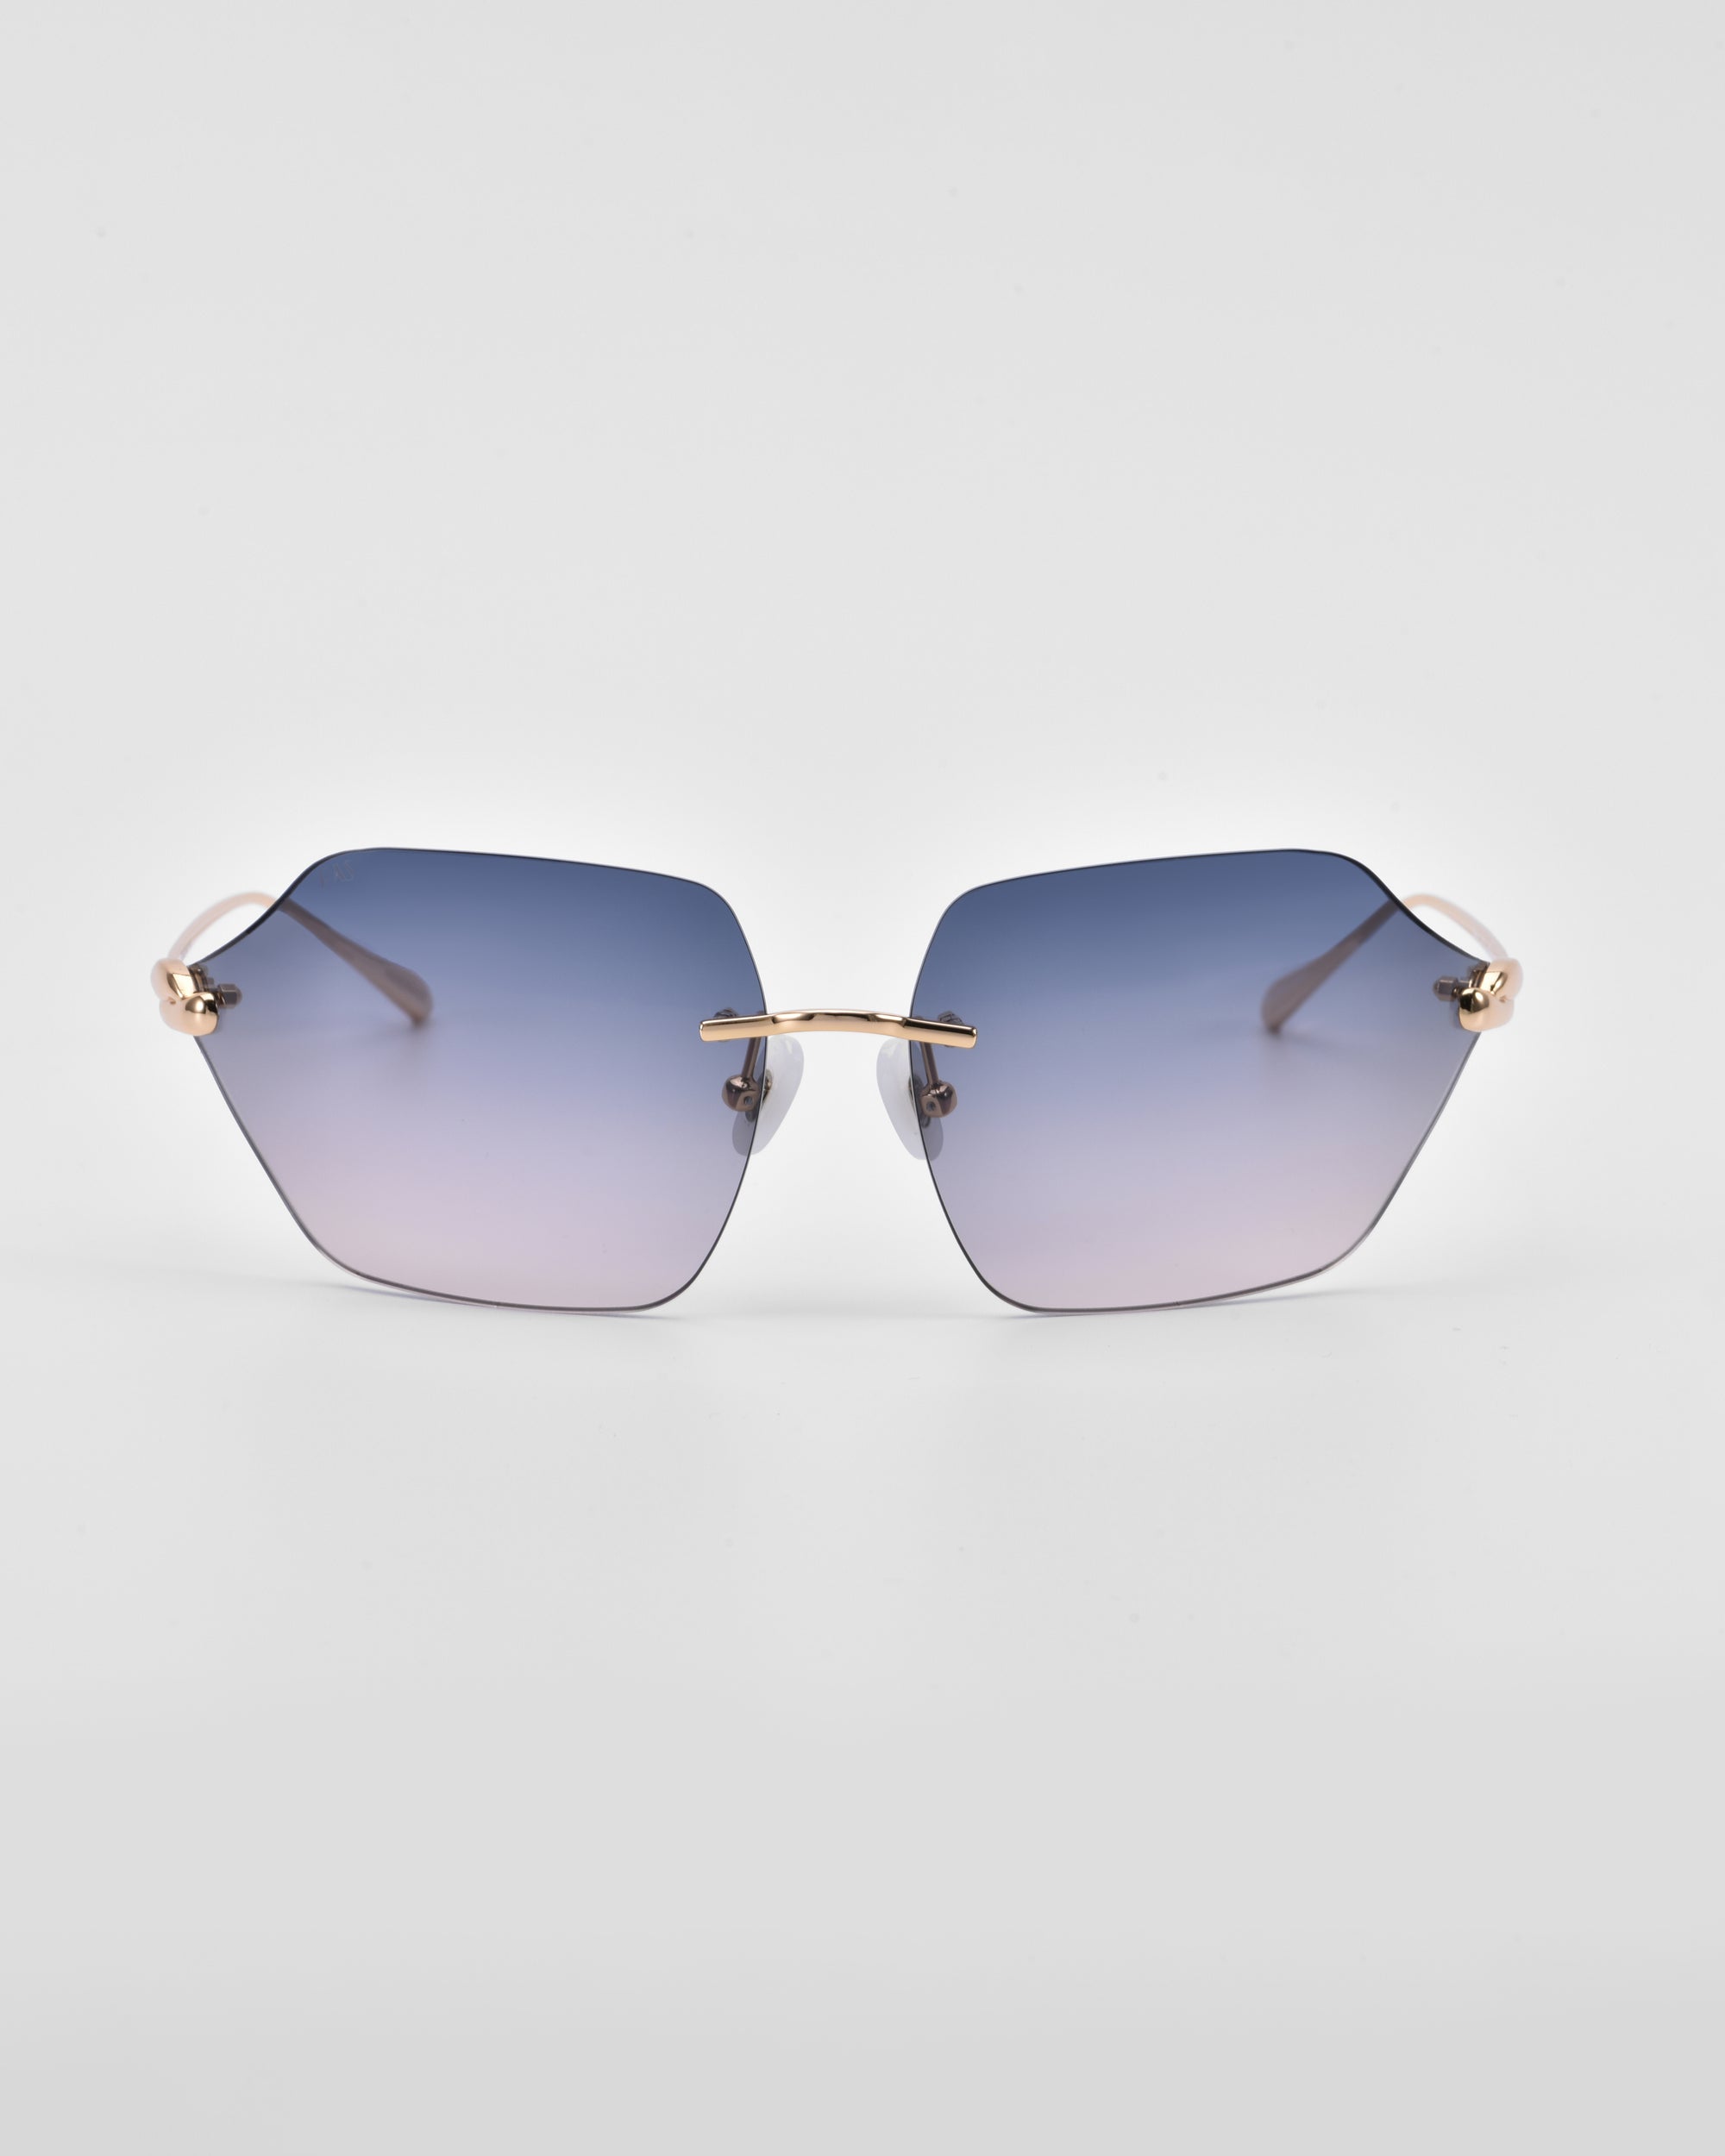 A pair of stylish For Art's Sake® Serpent II sunglasses with gradient purple lenses and gold detailing. The lenses have a unique pentagonal shape, enhanced by the 18-karat gold plating on the thin temples and nose bridge. The background is plain white.